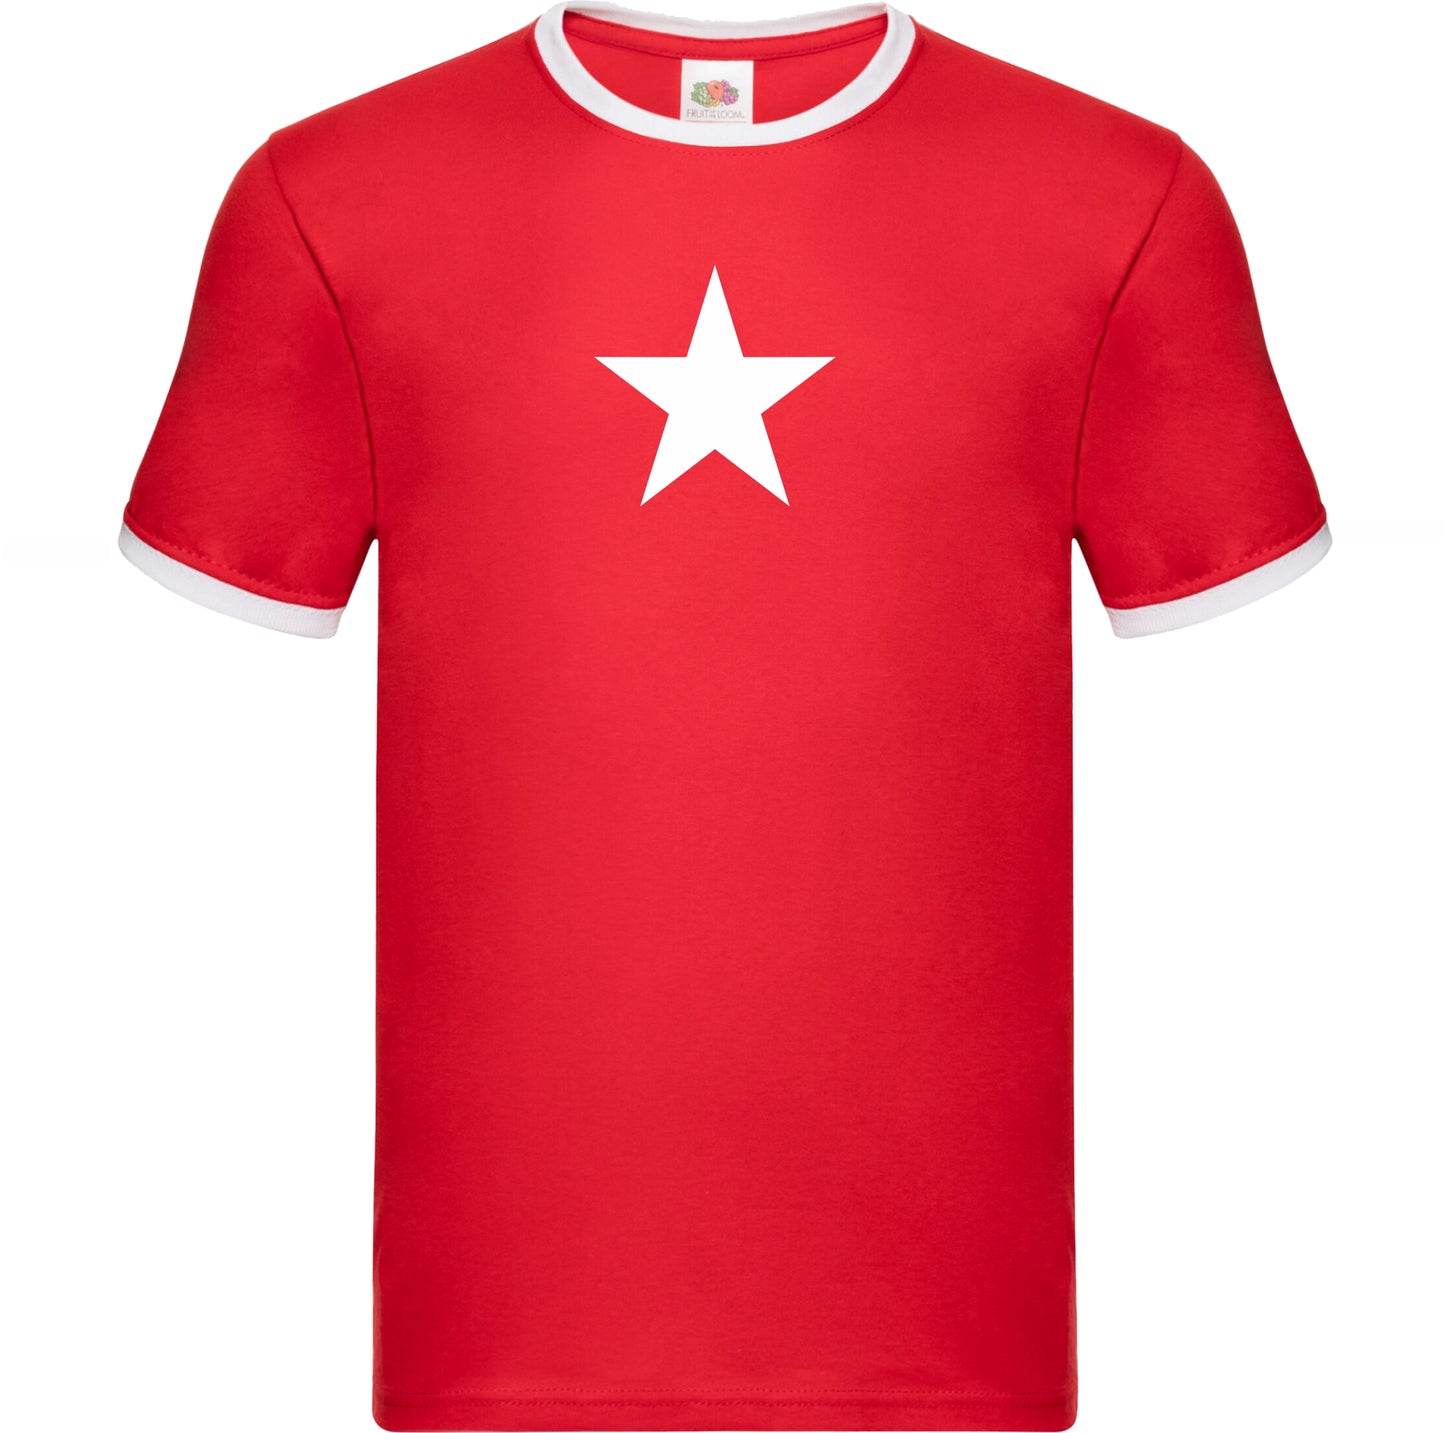 Red Star Ringer T-Shirt - Retro Sub Culture, Protest, Various Colours